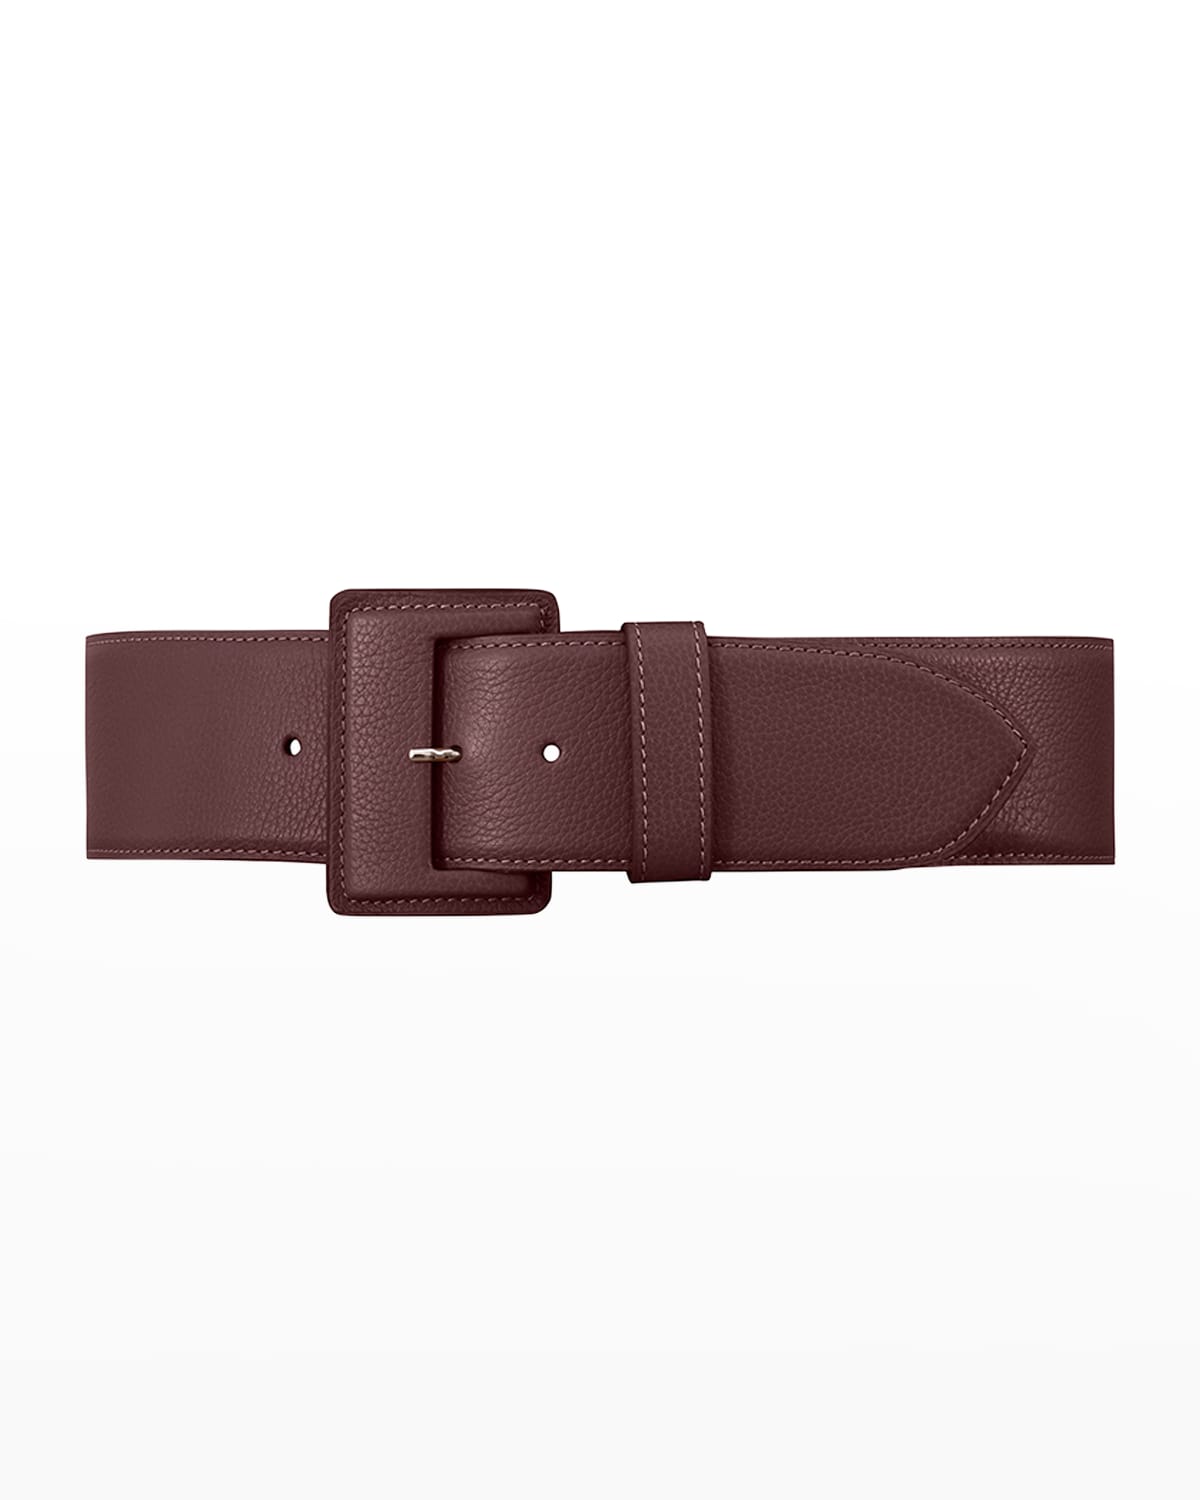 La Merveilleuse Large Pebbled Leather Belt with Covered Buckle